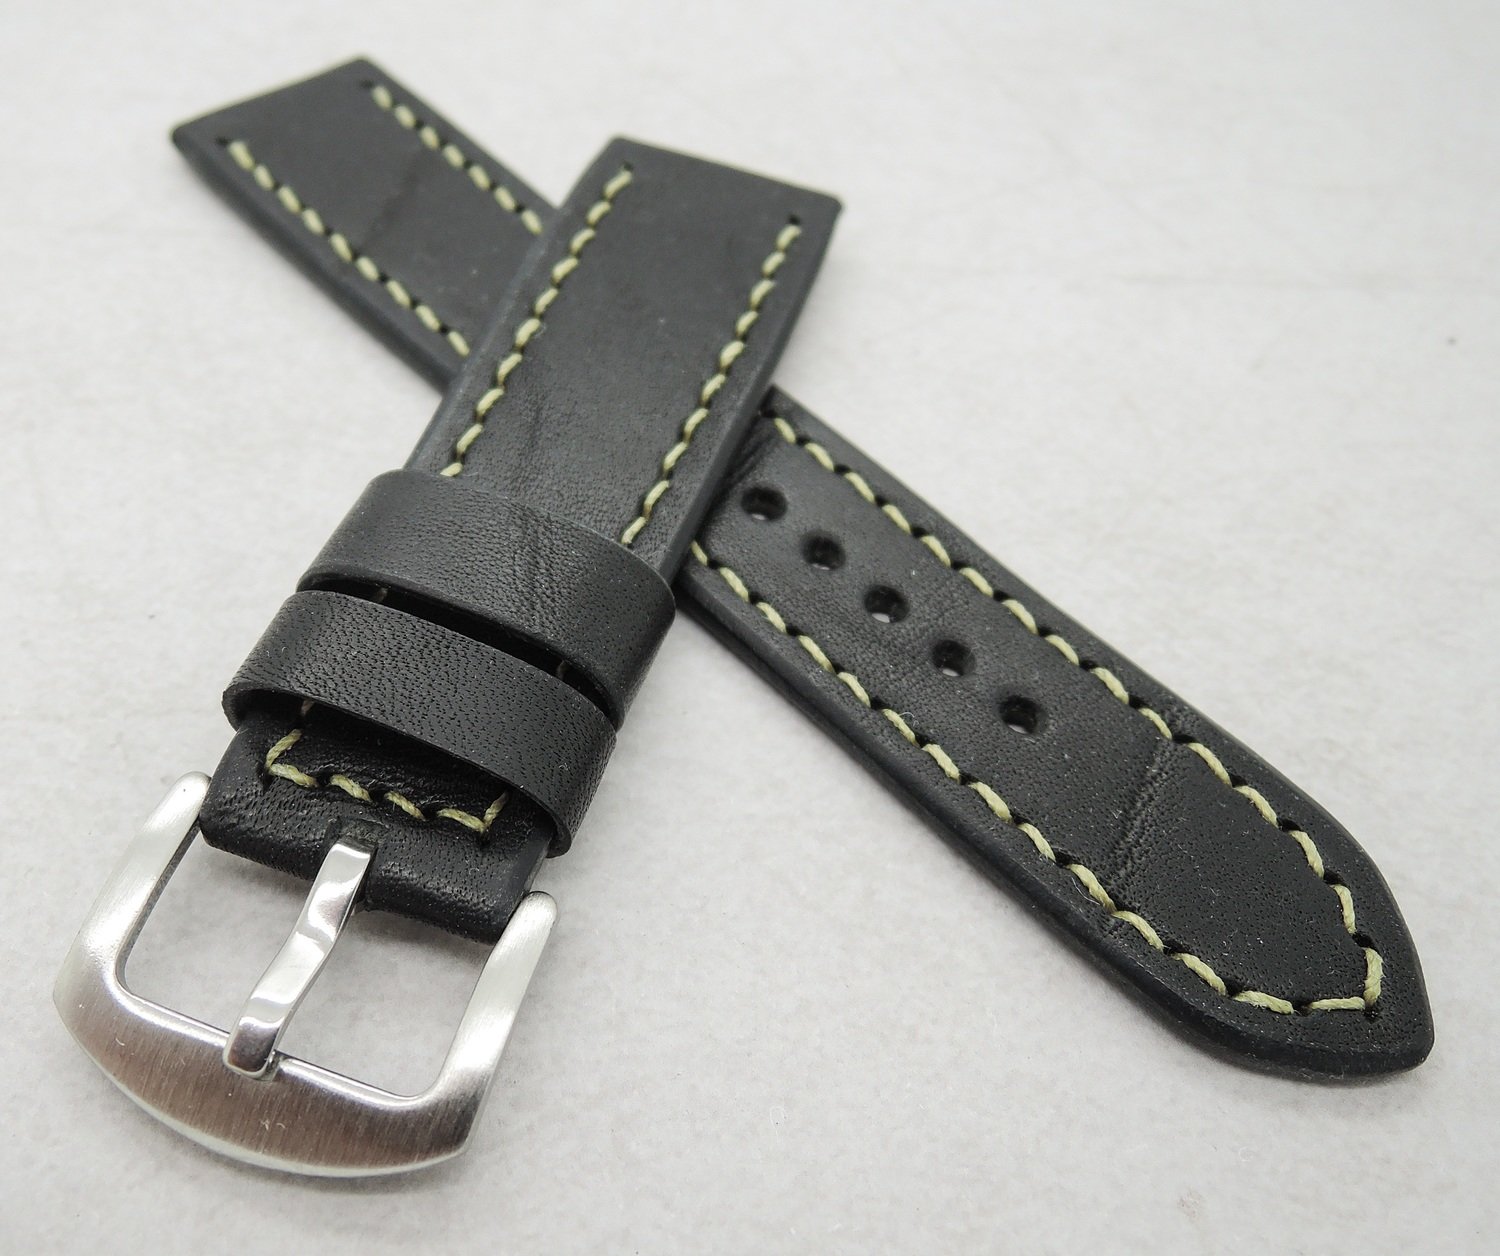 22mm wide black veg tan strap (20mm at the buckle)